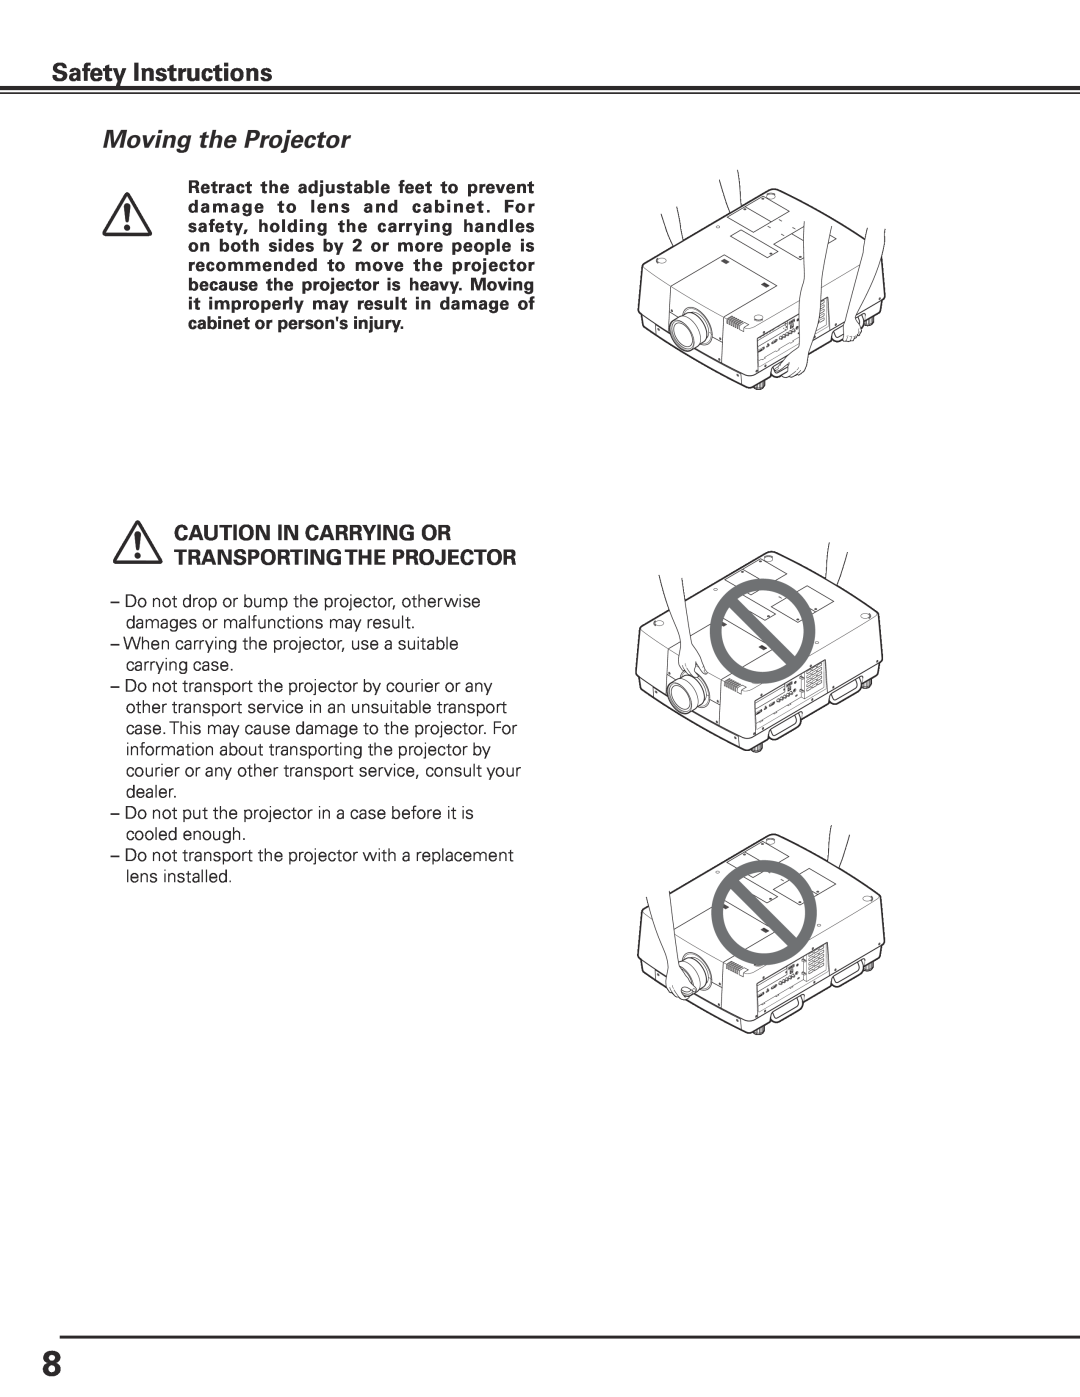 Sanyo HF15000L owner manual Moving the Projector, Safety Instructions, Caution In Carrying Or Transporting The Projector 